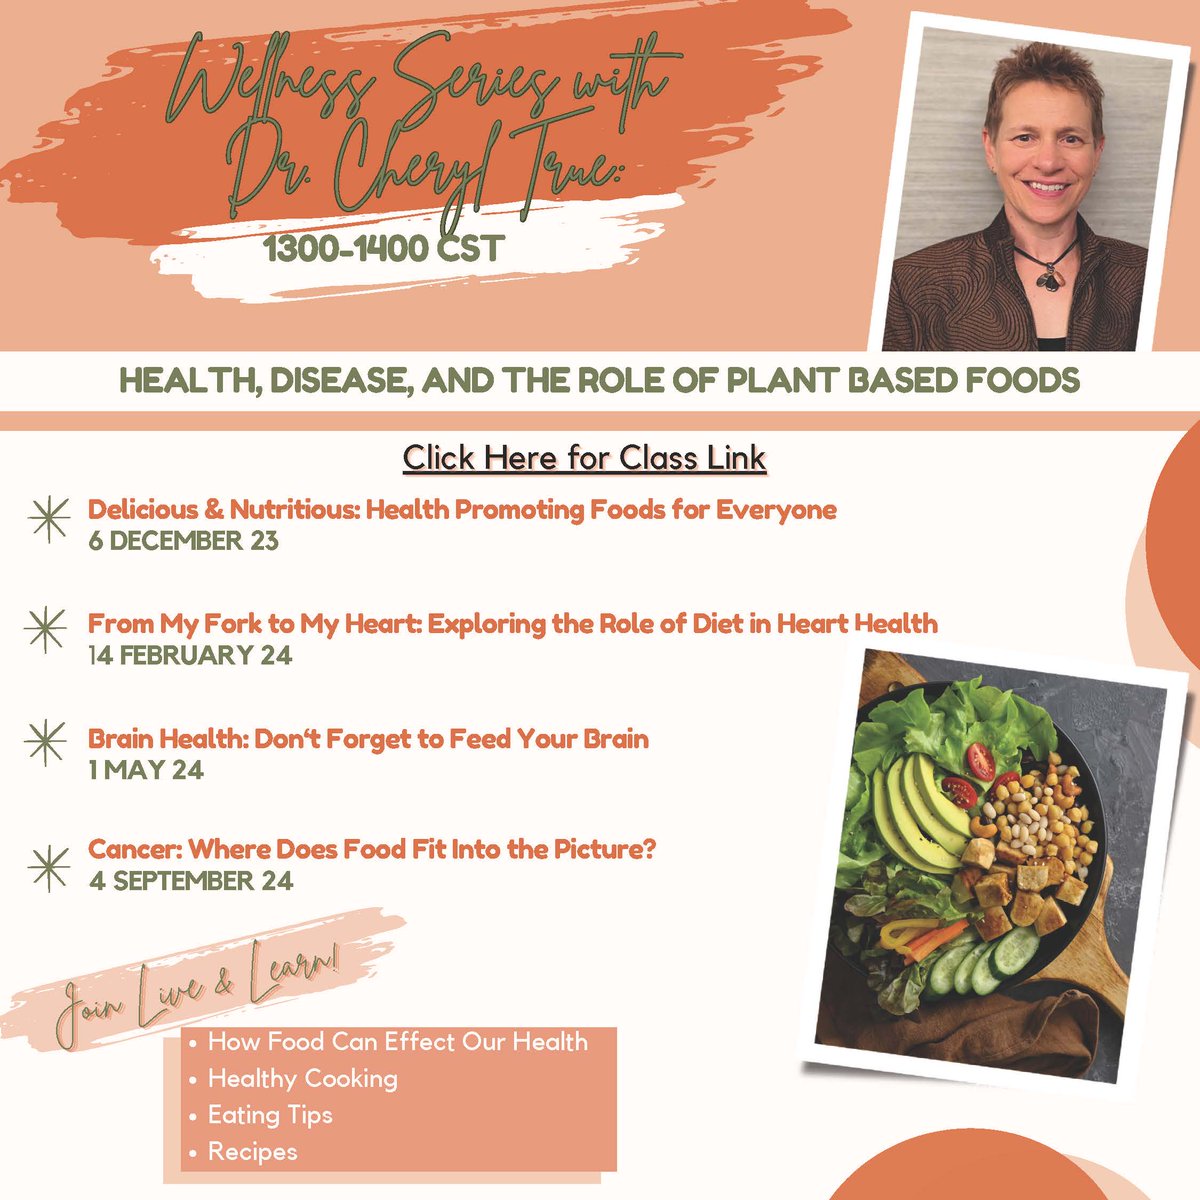 Join the Wellness Series with Dr. True to learn about how food can effect our health. The next class is on May 1 at 1 p.m. #LivingHealthy